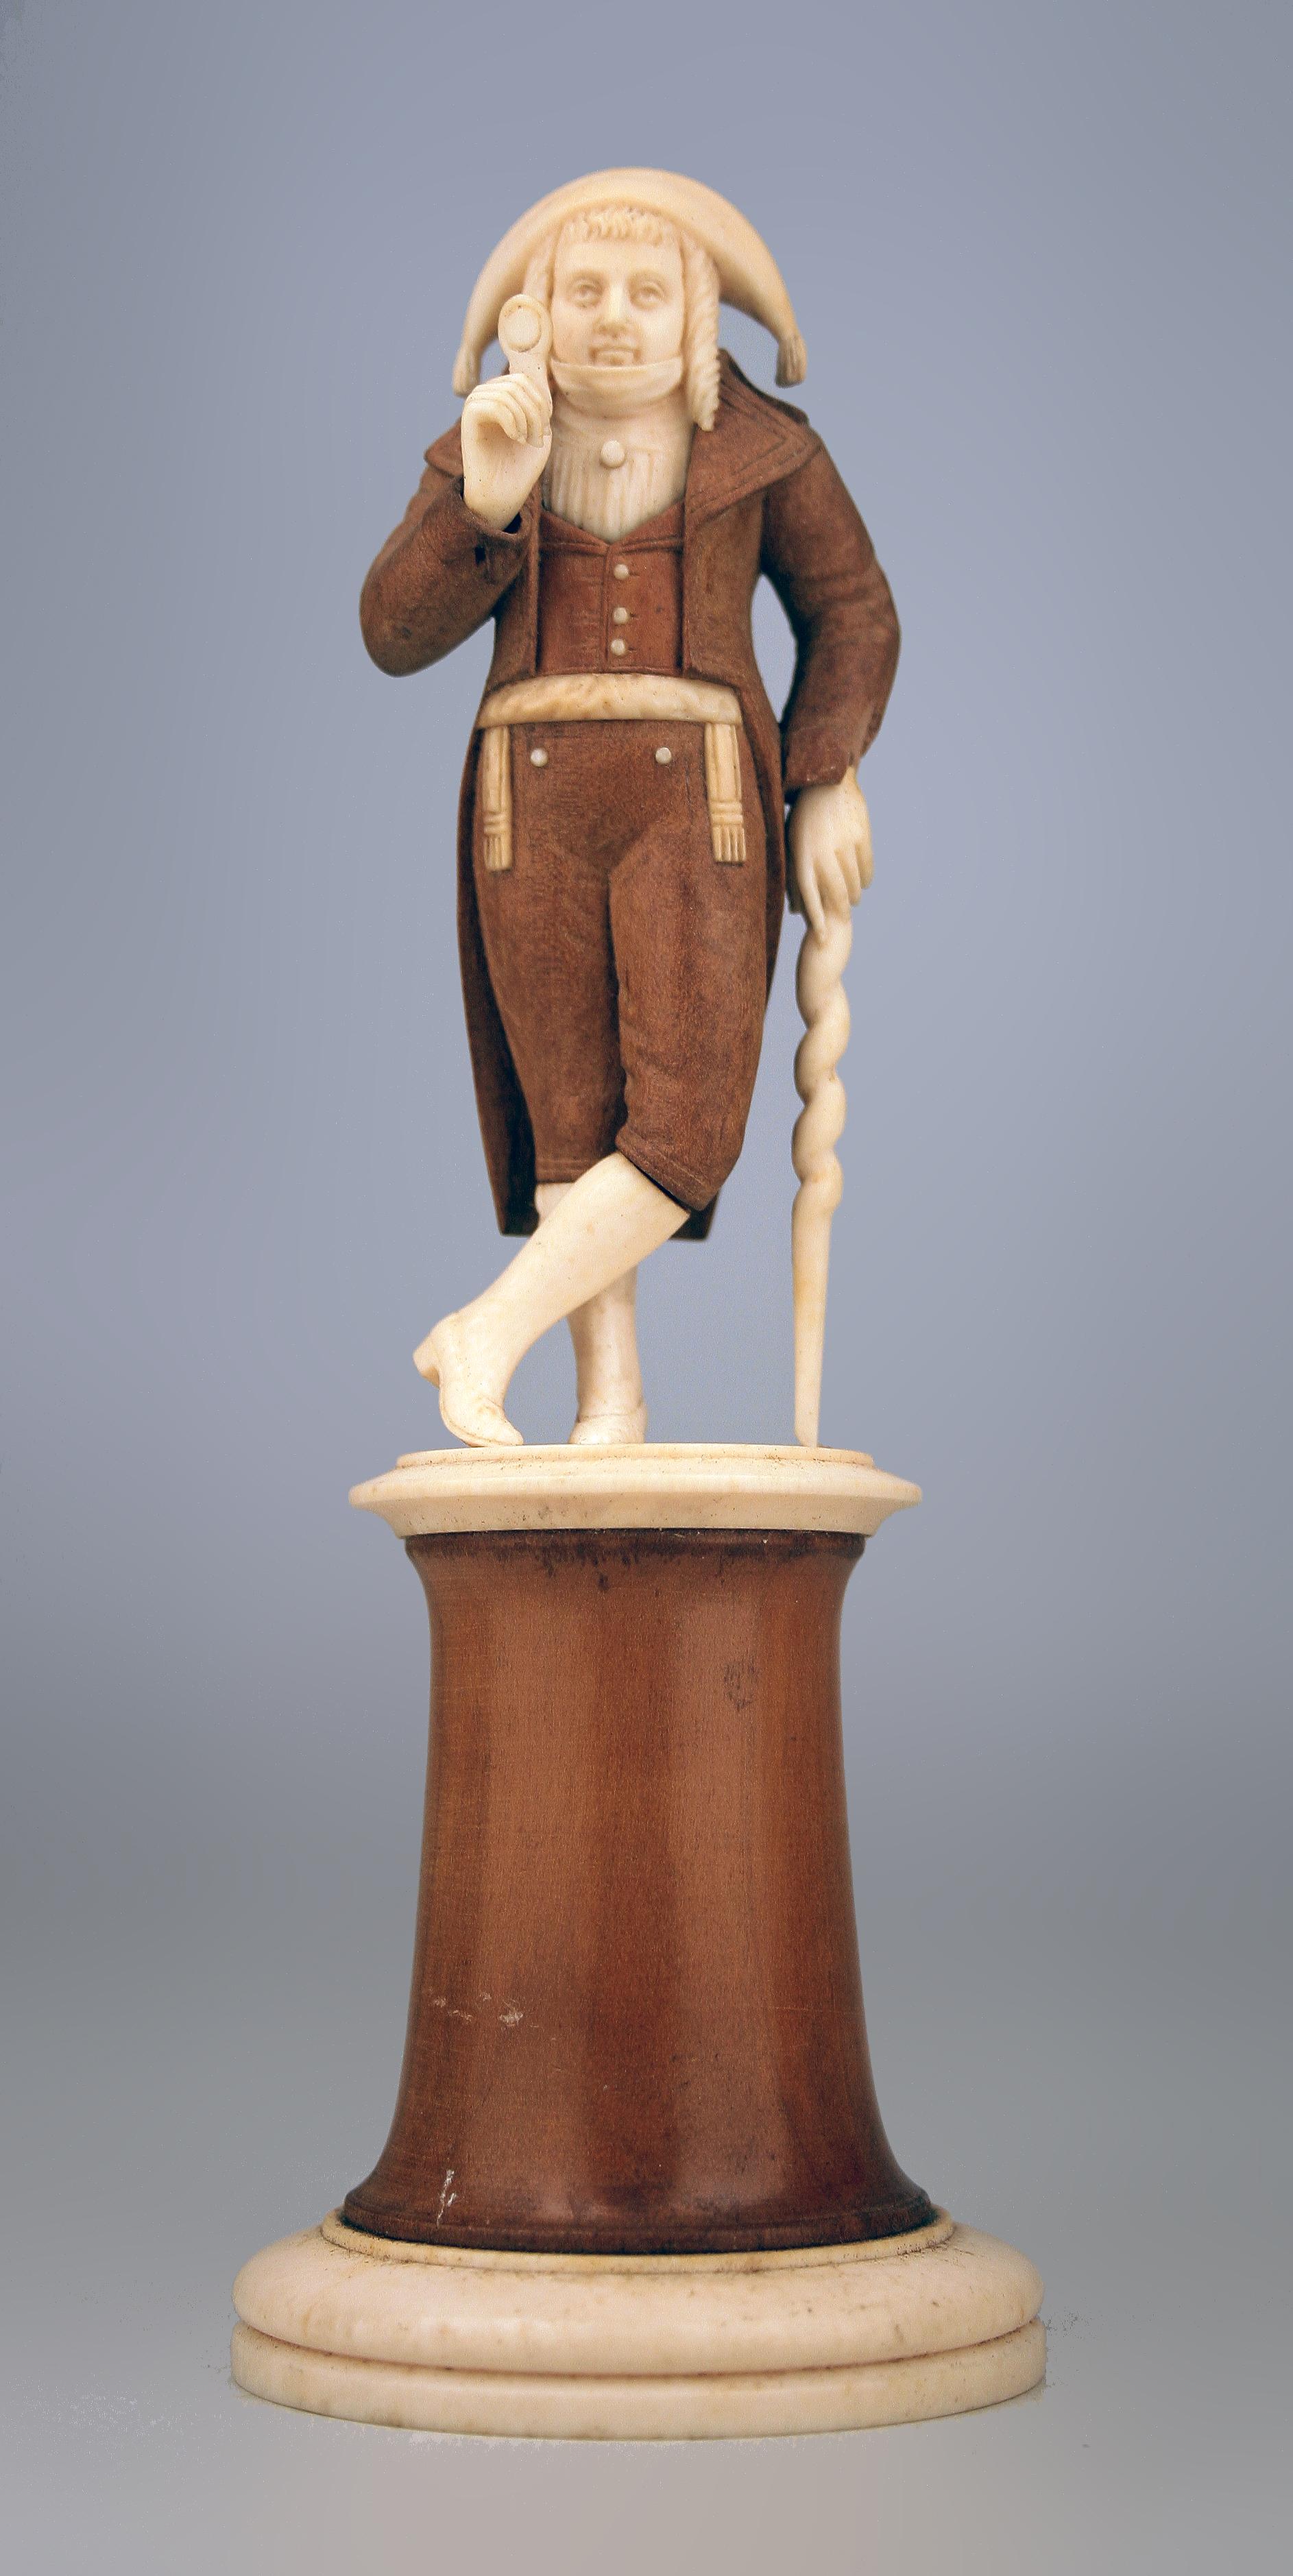 19th century French Empire hand-carved Dieppe wood and ivory sculpture of an 'Incroyable'

By: unknown
Material: wood, ivory
Technique: hand-carved, carved
Date: 19th century
Style: Empire, Napoleon III
Place of origin: France

This 19th century